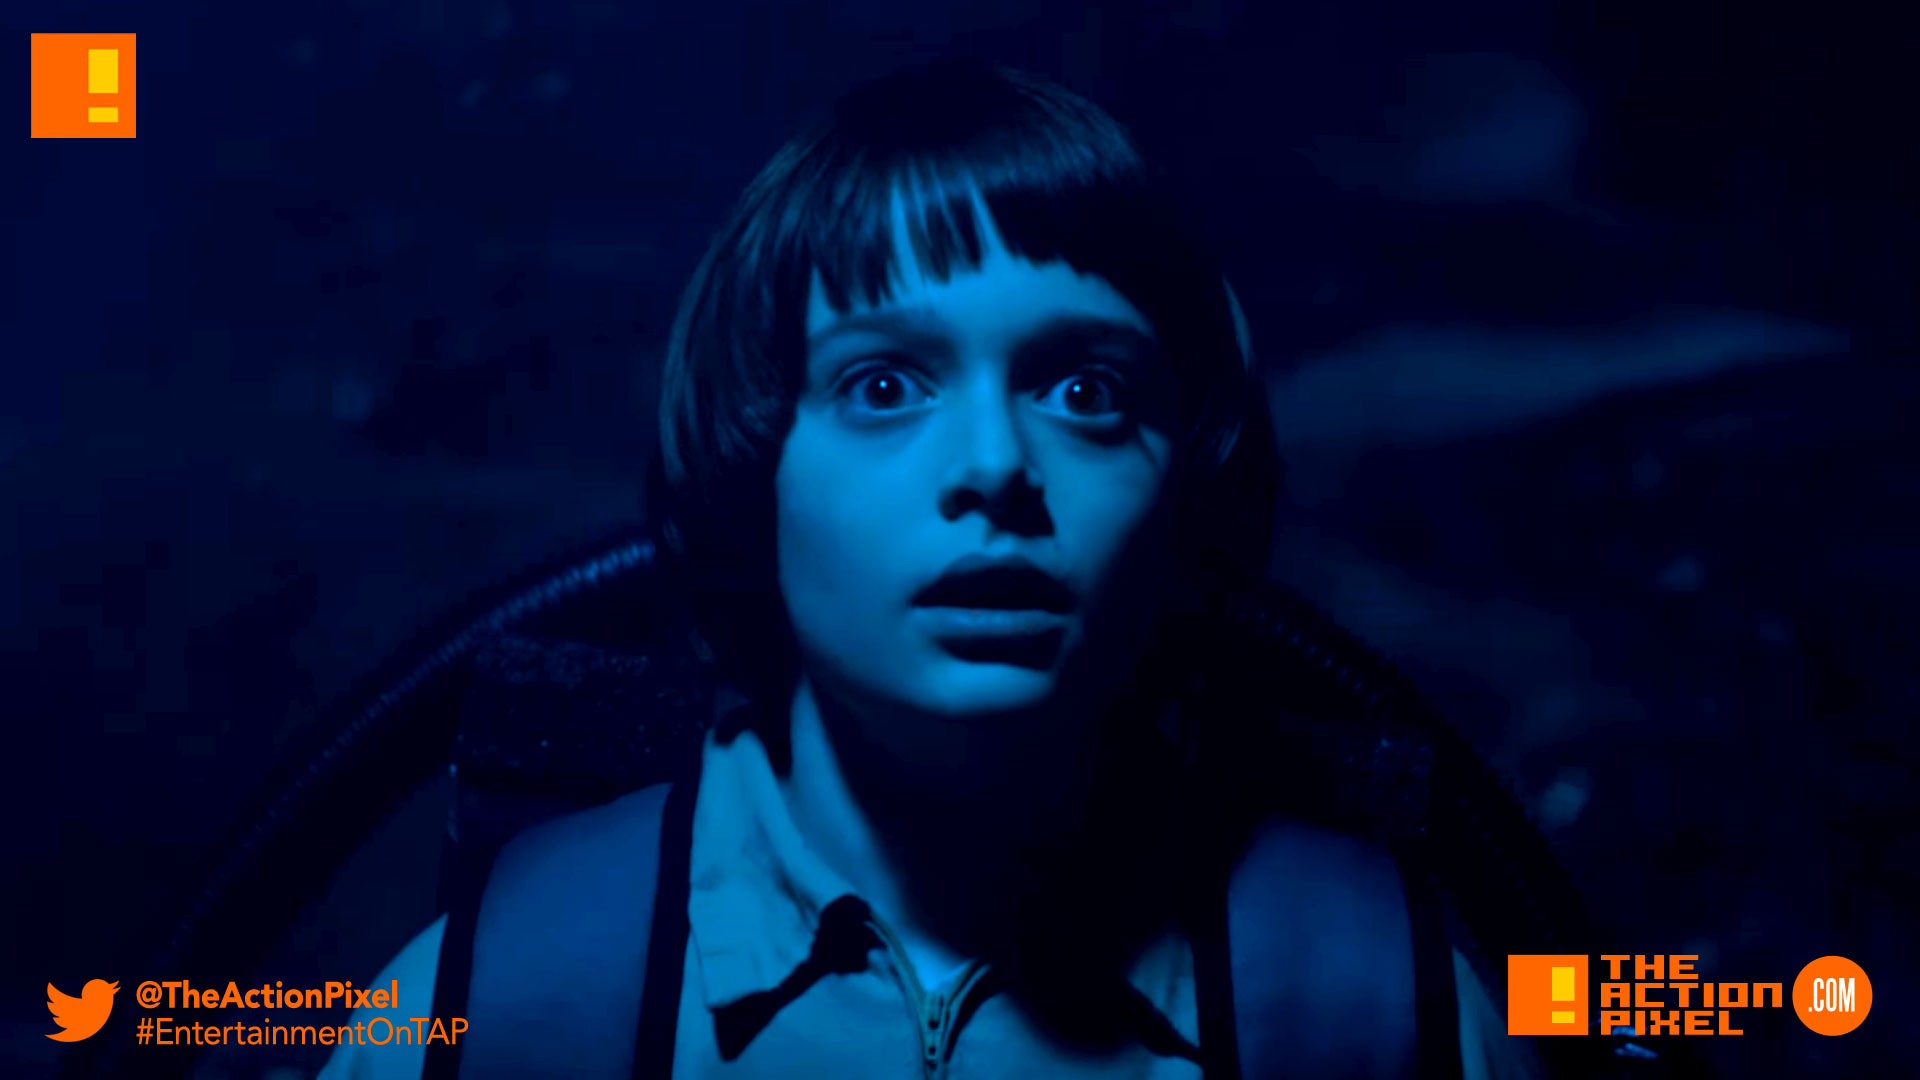 The Final Trailer For “stranger Things 2” Brings The Upside Down